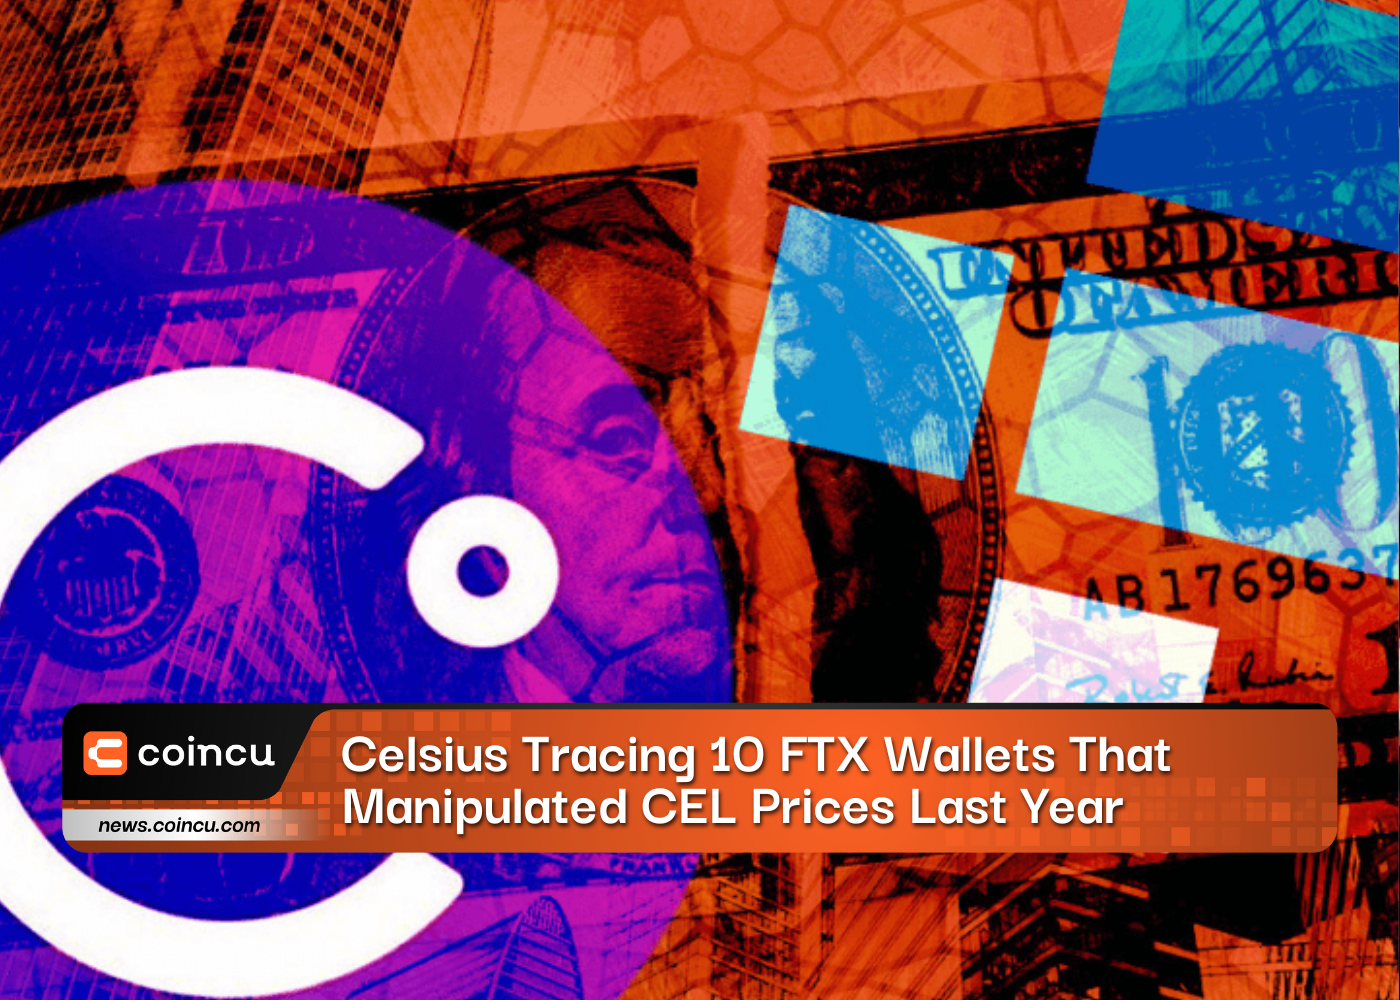 Celsius Tracing 10 FTX Wallets That Manipulated CEL Prices Last Year